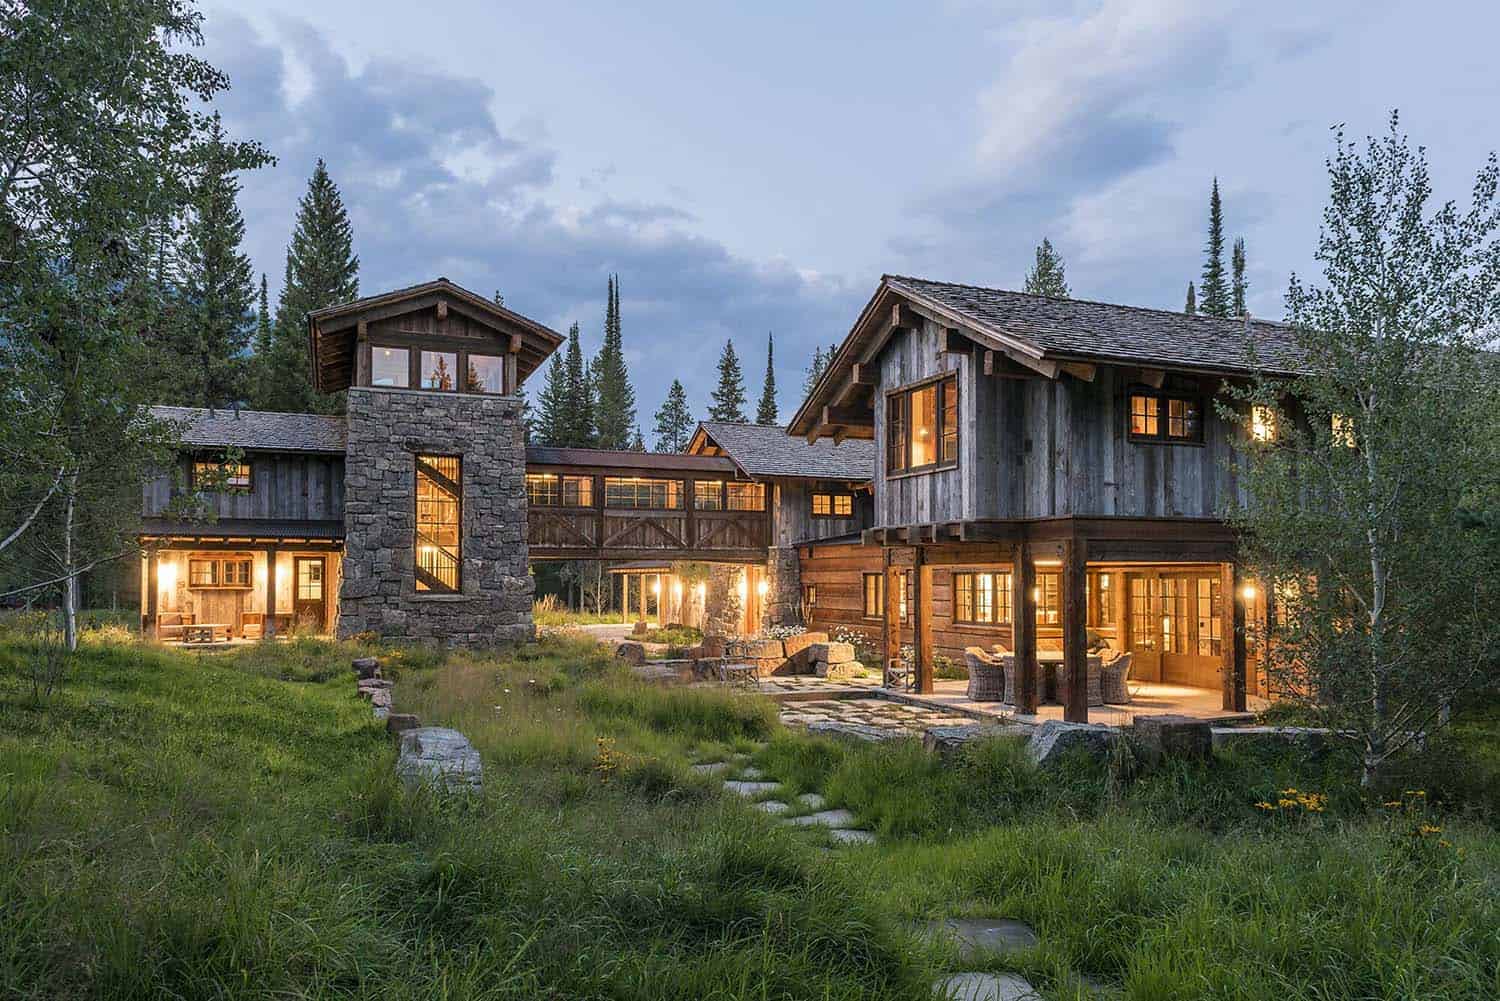 A gorgeous rustic mountain retreat embracing the remote Wyoming wilderness